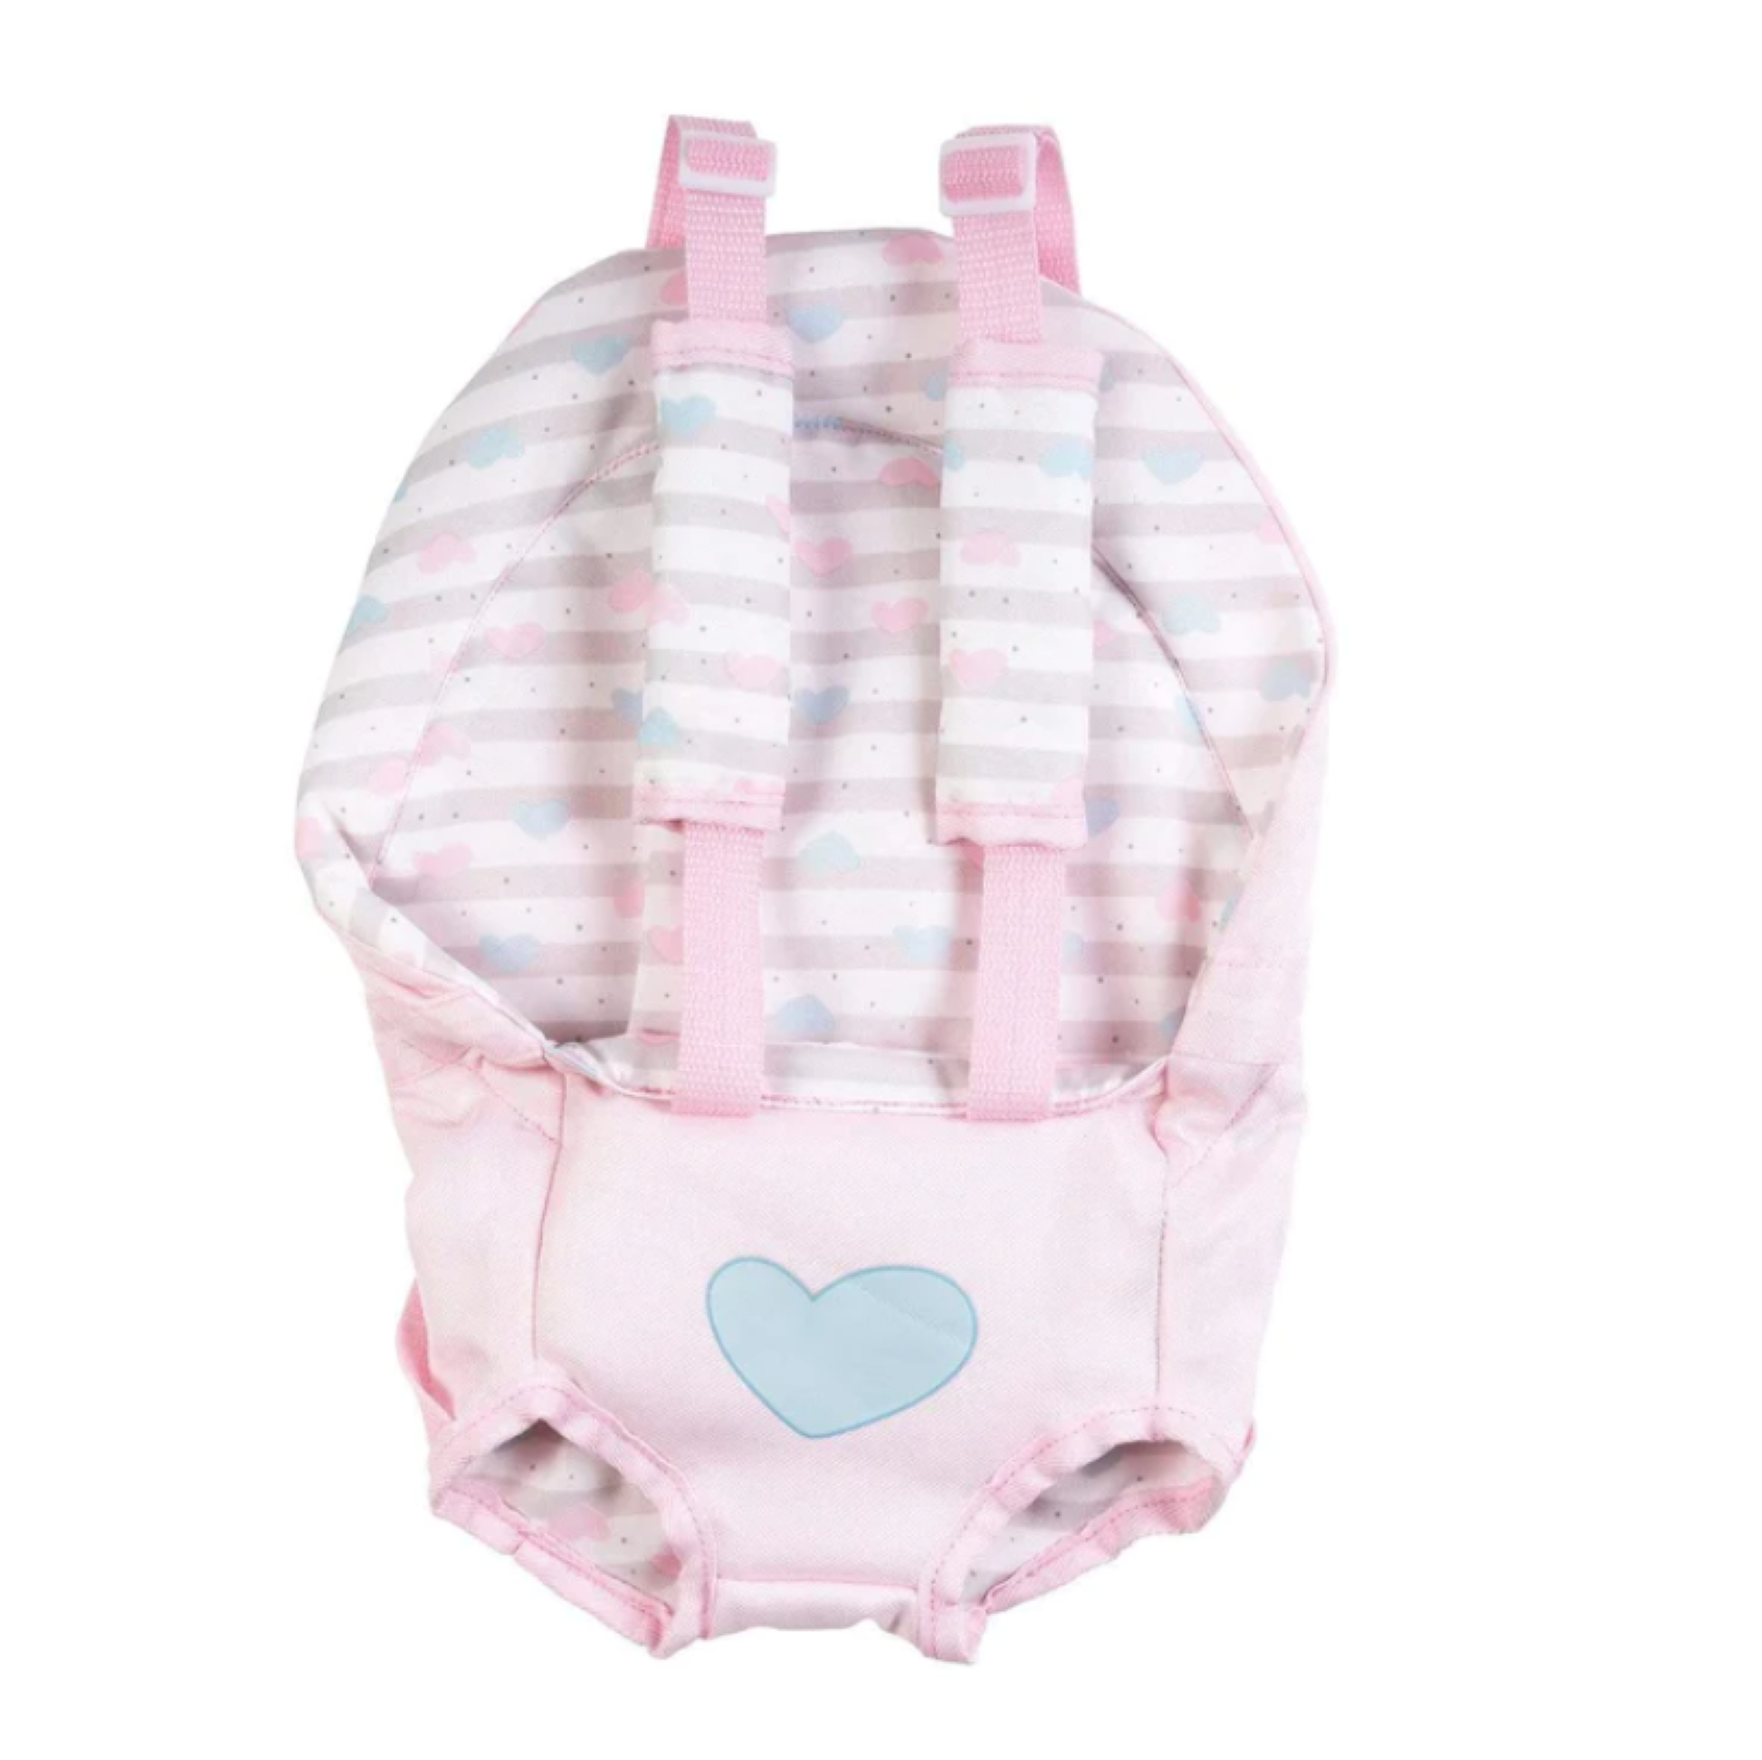 Adora Classic Pastel Pink Baby Carrier Snuggle fits 14-20"